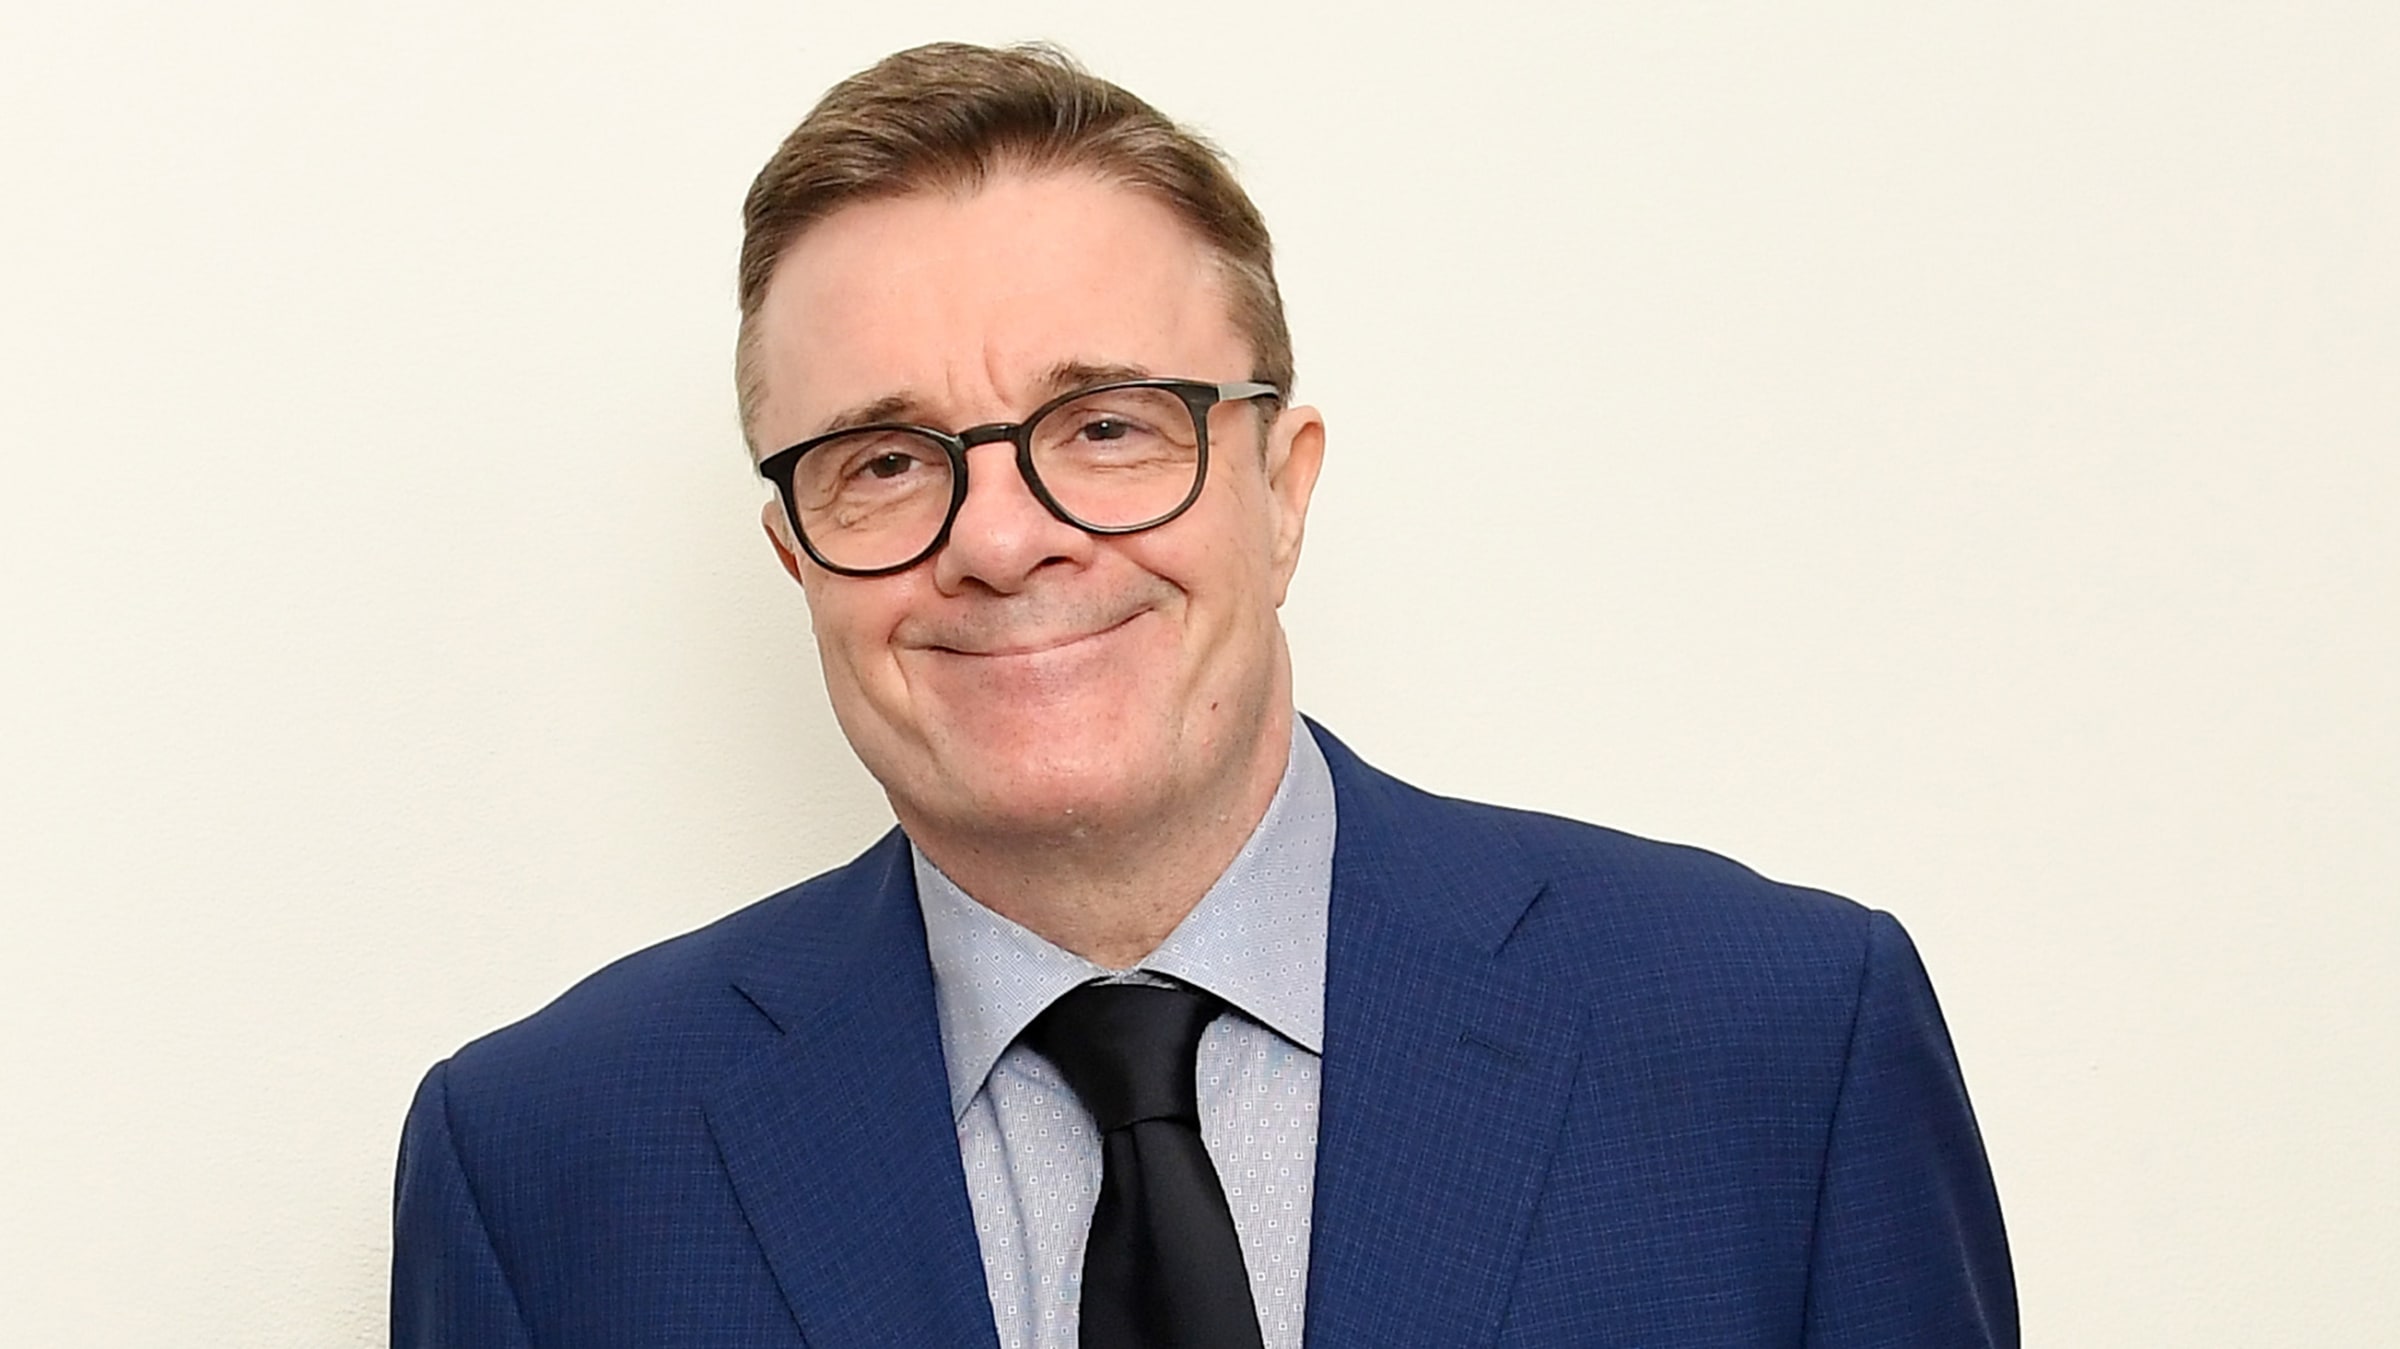 Nathan Lane Wishes Hed Been Brave Enough to Come Out to Oprah After The Birdcage pic